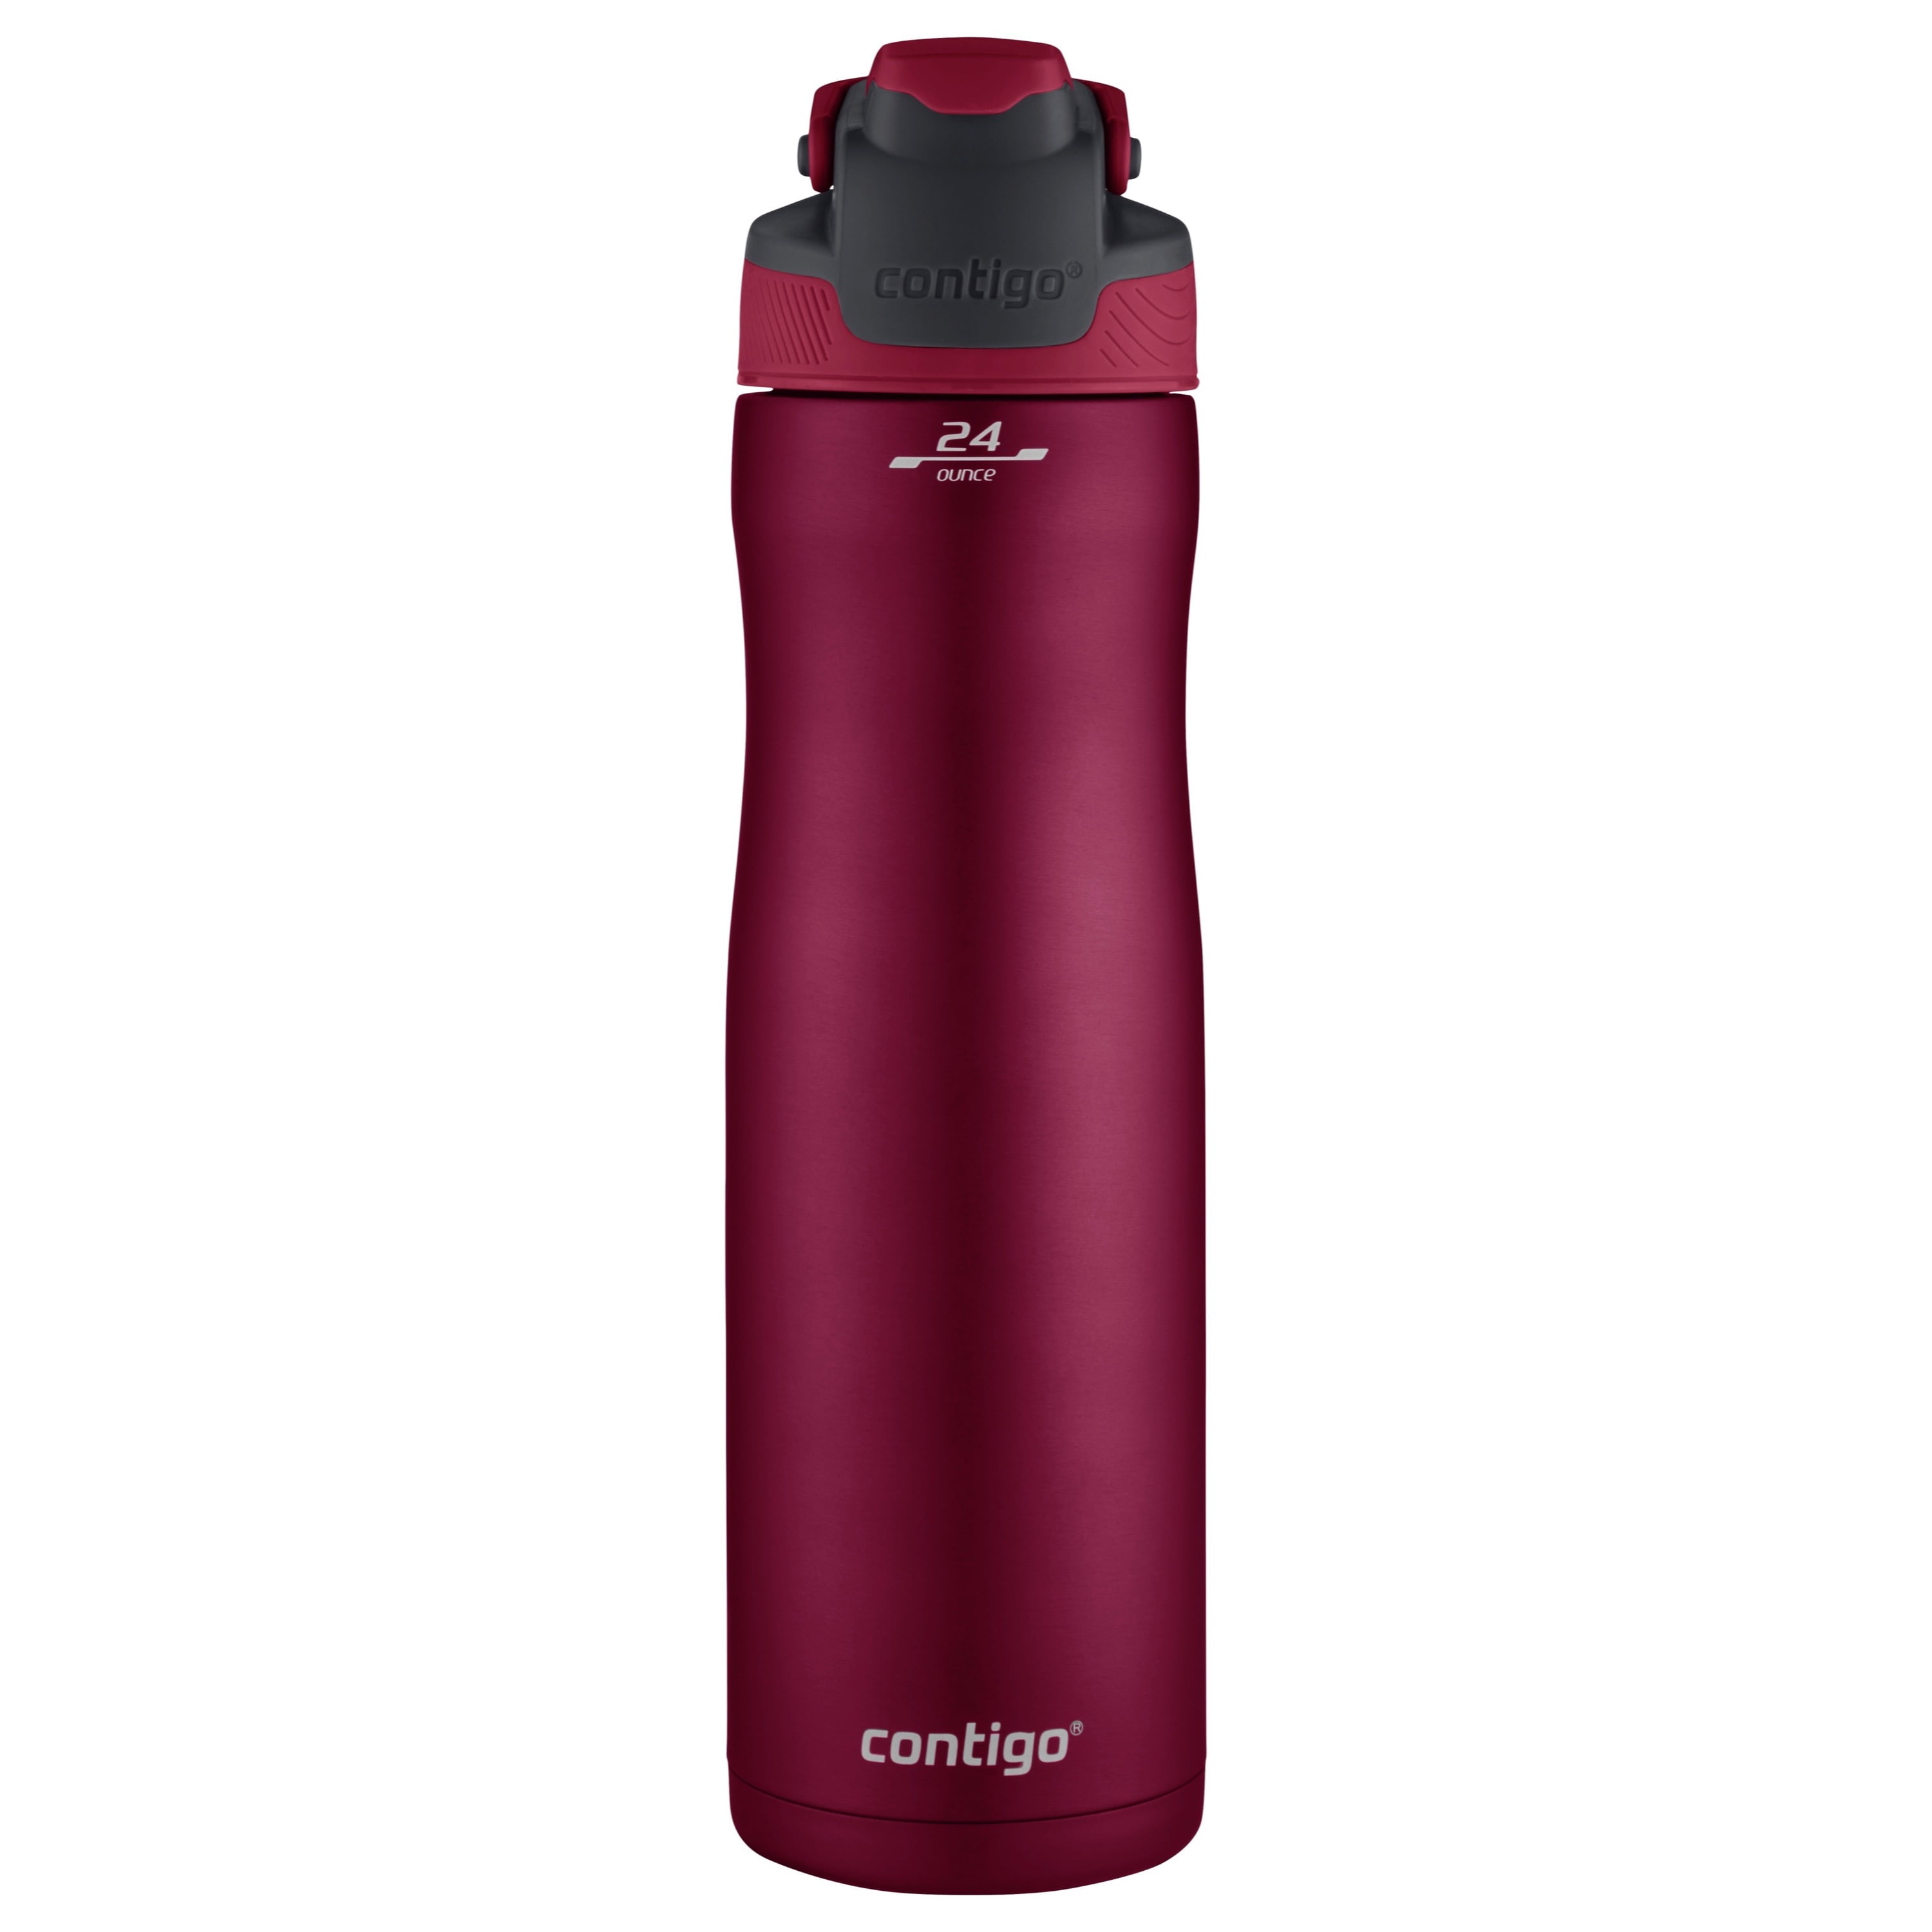 Contigo Autoseal Chill Stainless Steel Water Bottle 24 Oz Very Berry for sale online 